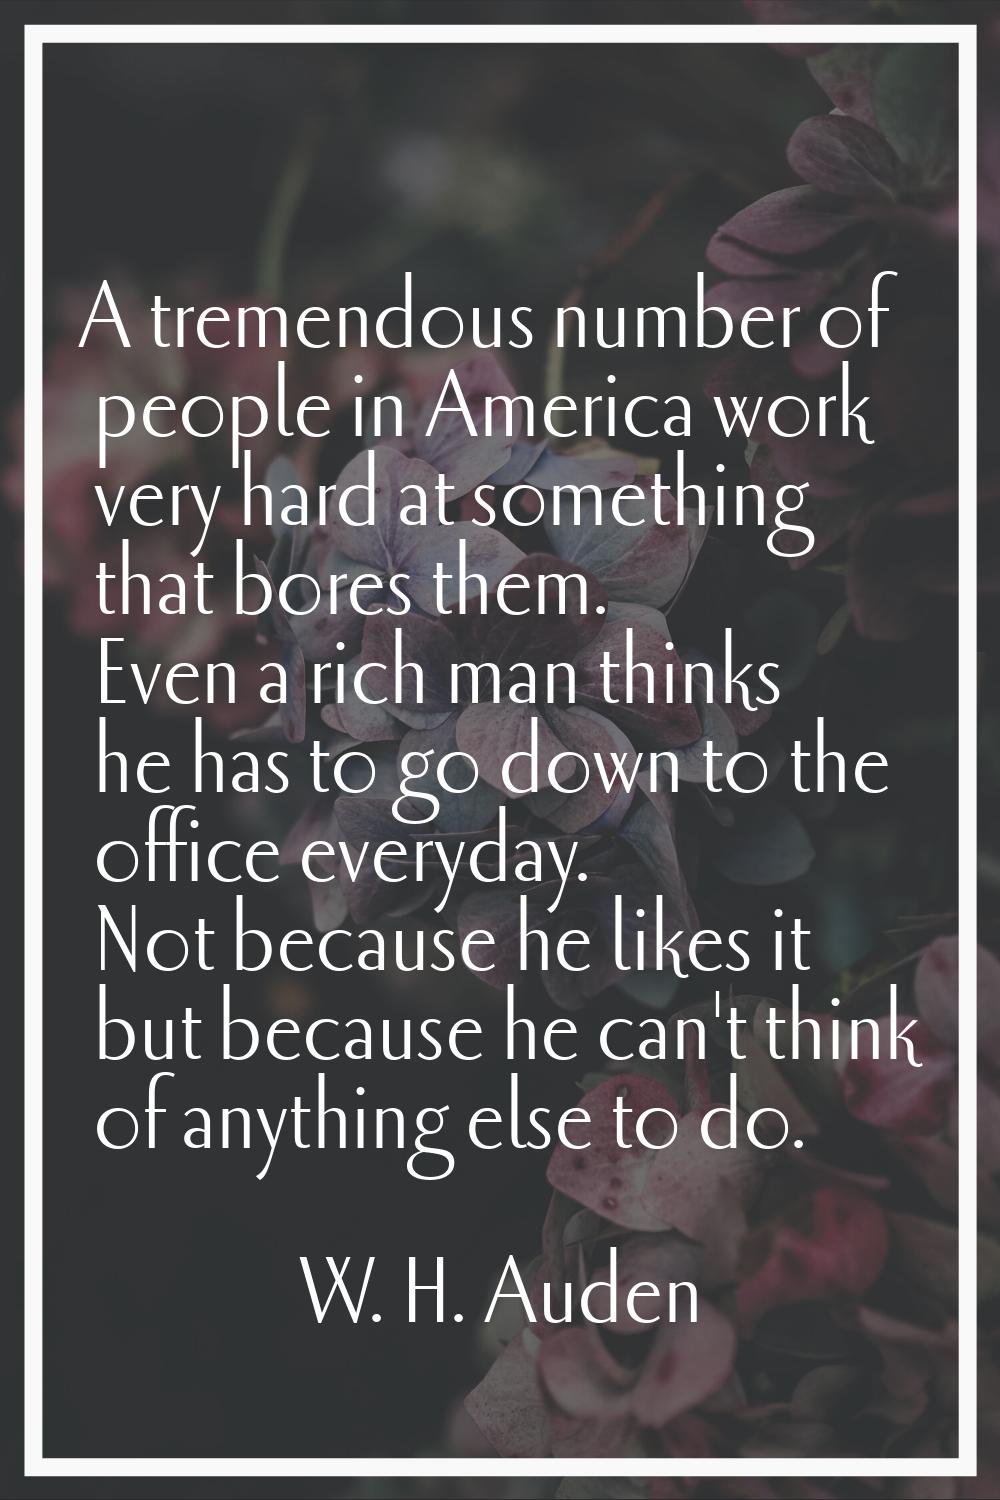 A tremendous number of people in America work very hard at something that bores them. Even a rich m